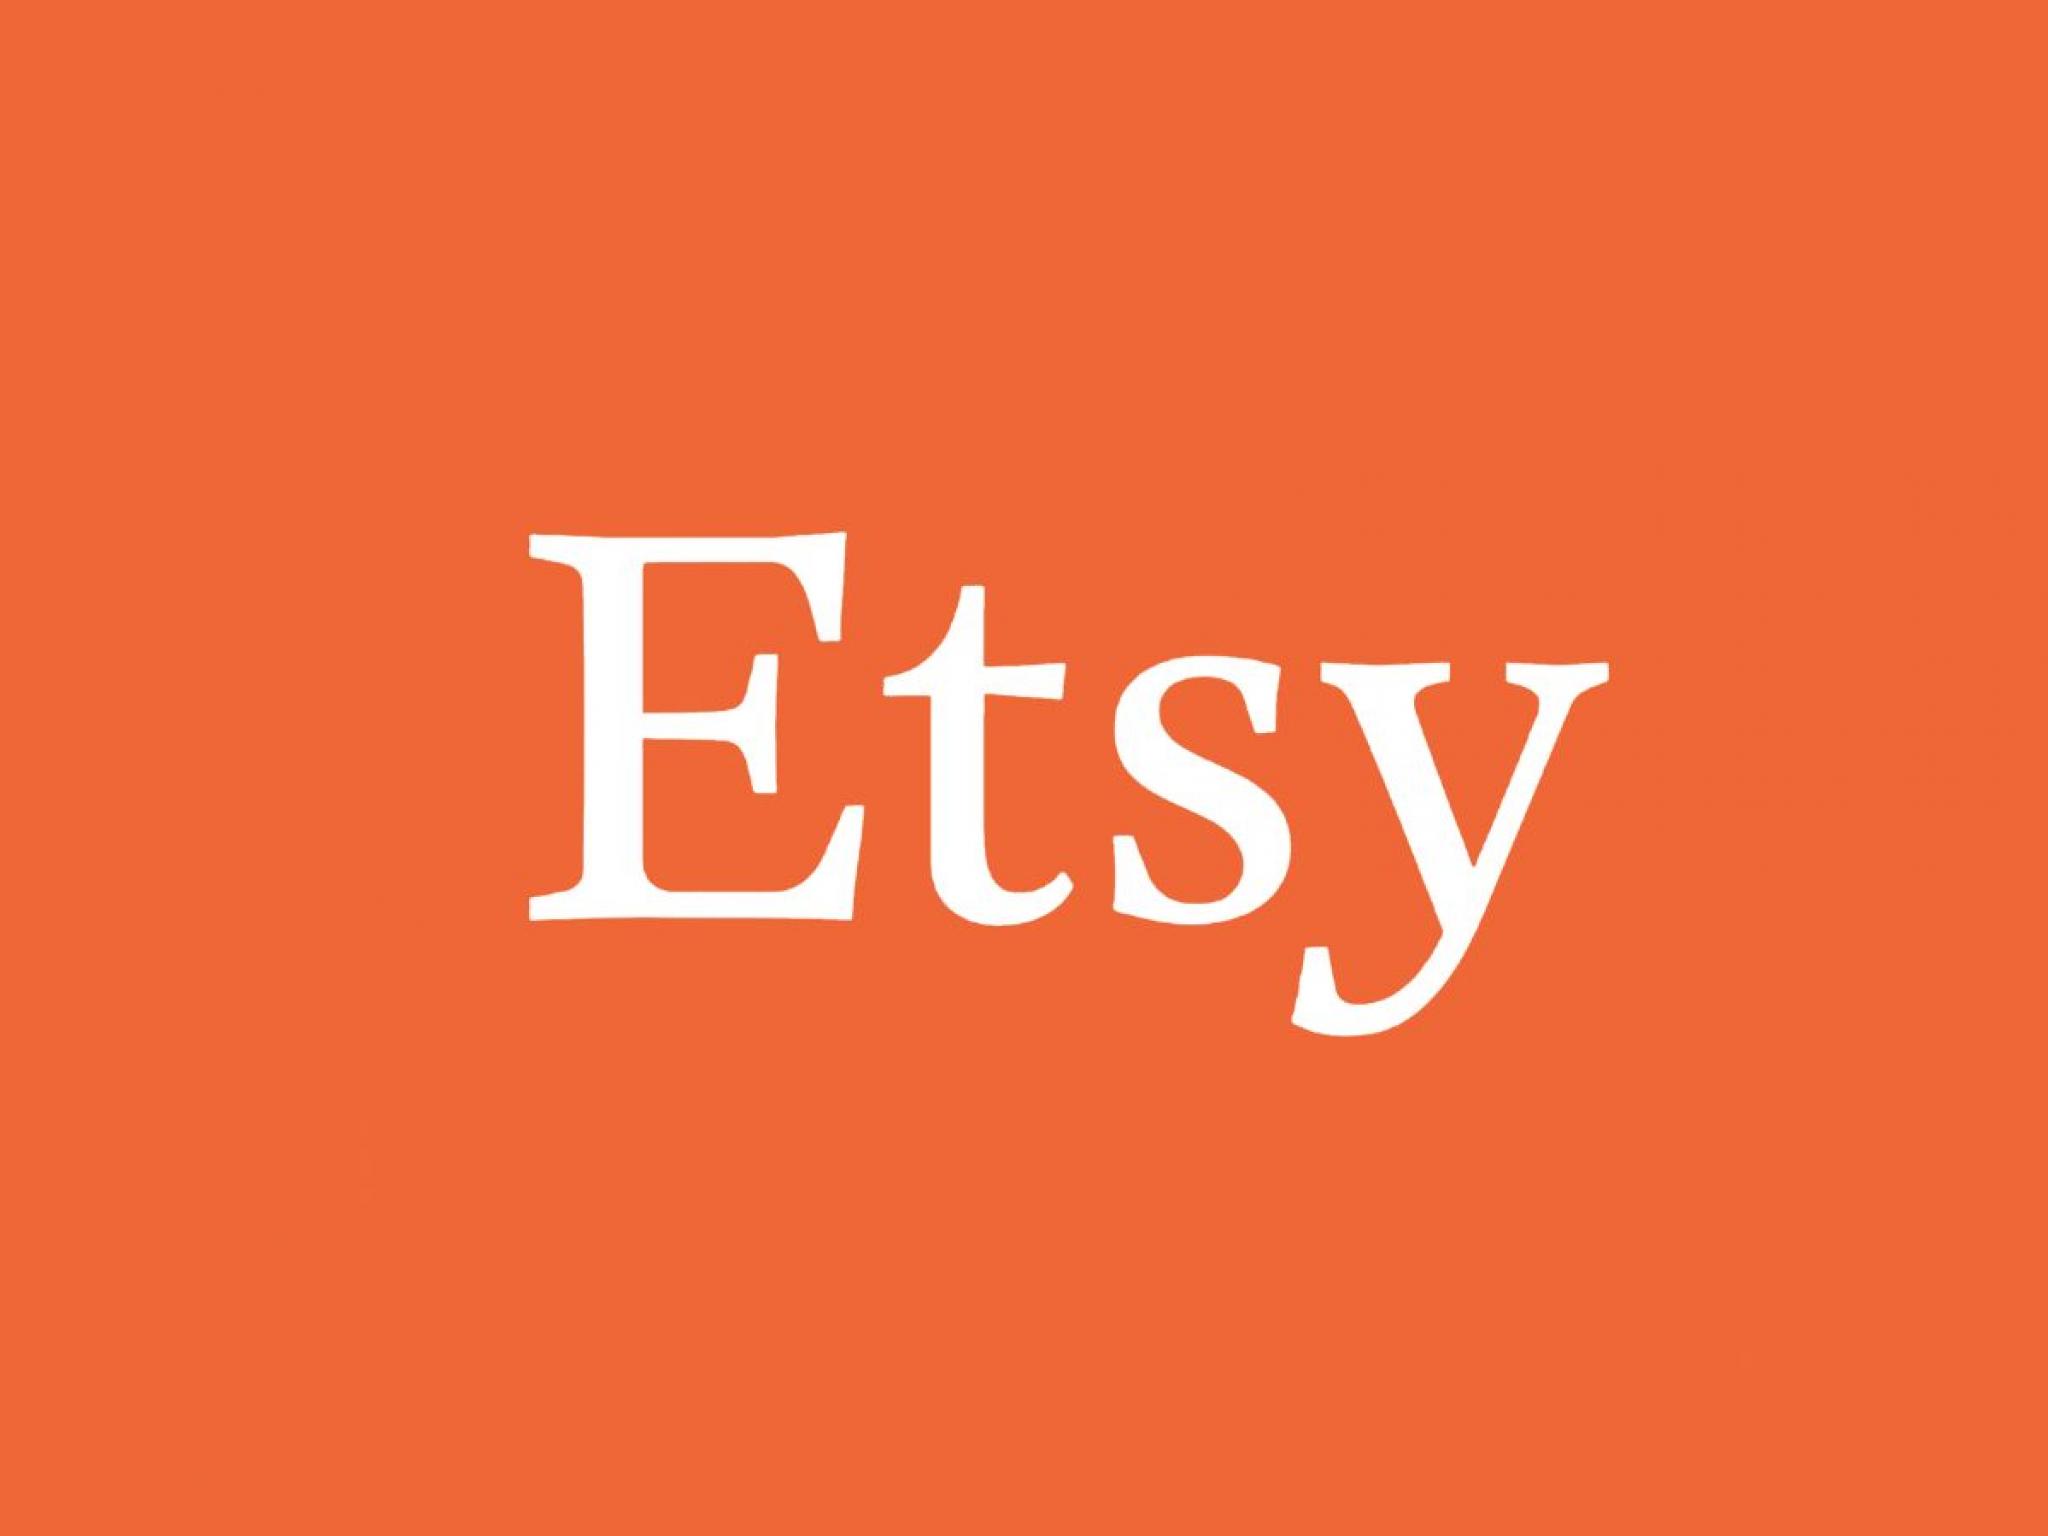  etsy-albemarle-solaredge-technologies-and-other-big-stocks-moving-lower-in-thursdays-pre-market-session 